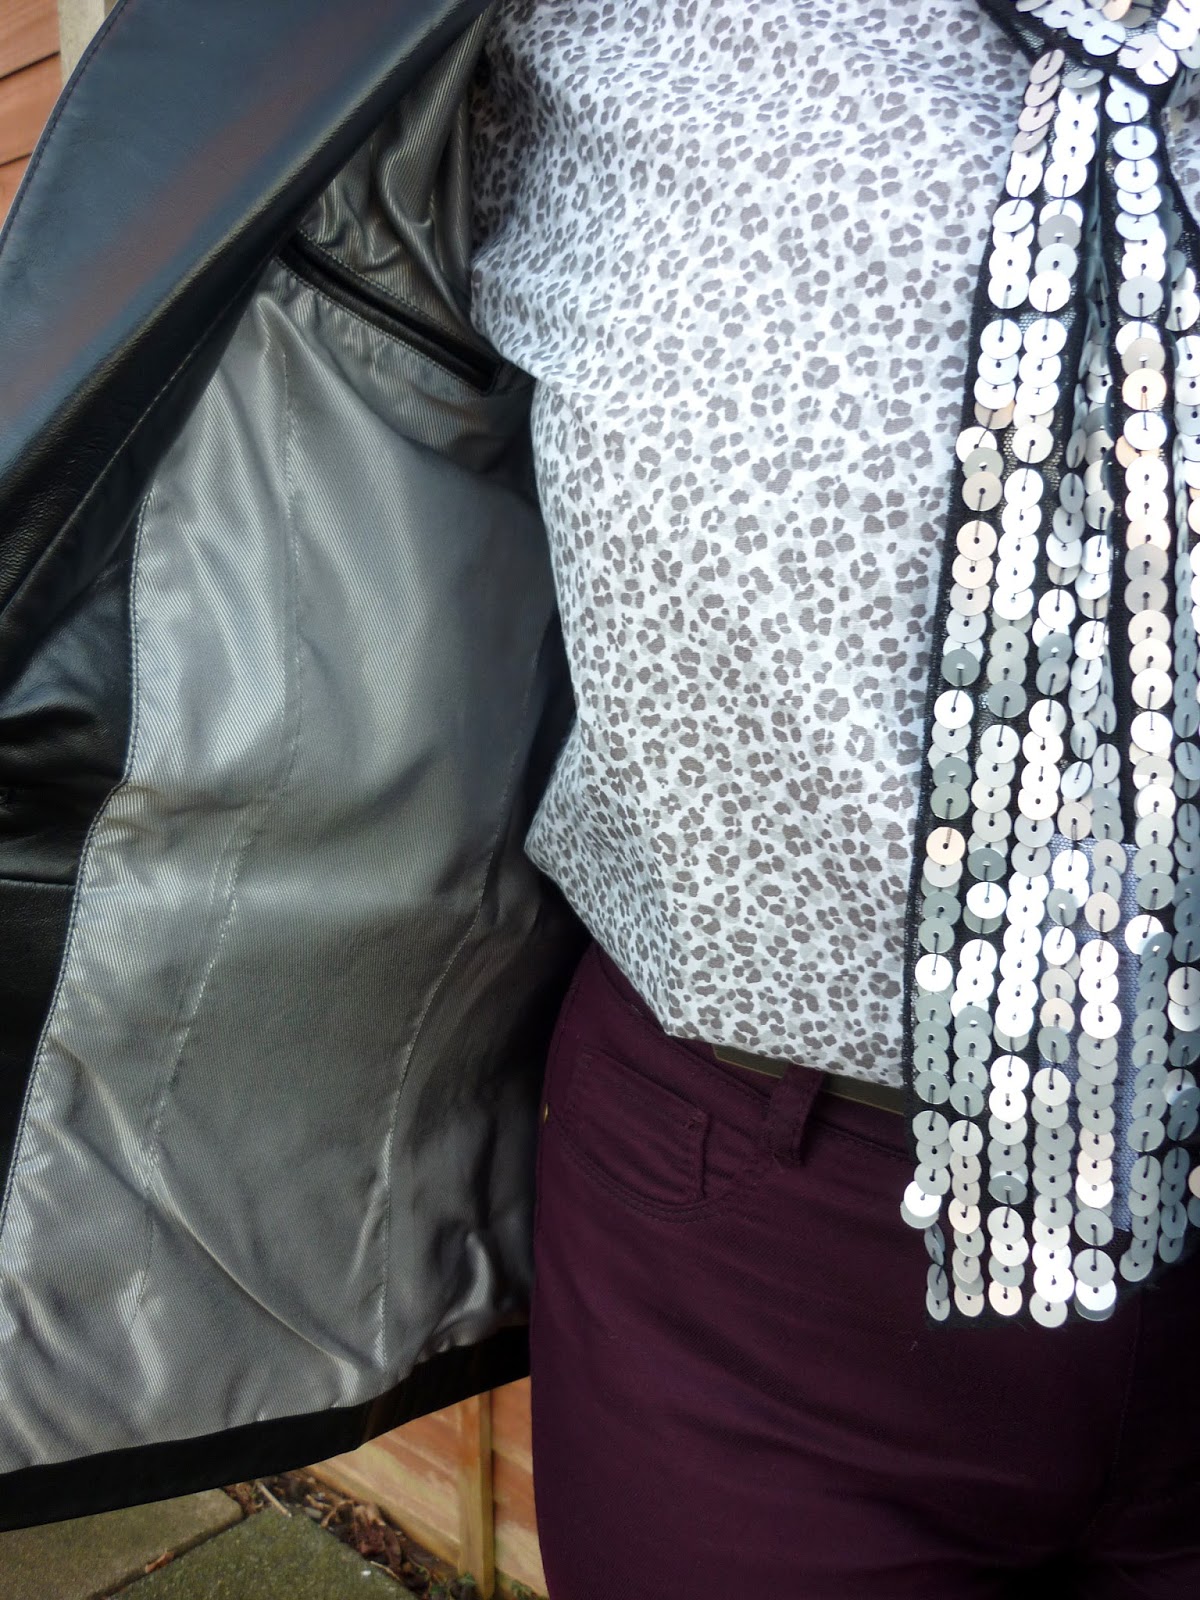 Lining of Precis Petite Leather Jacket, Land's End Shirt, New Look Sequin Scarf  | Petite Silver Vixen